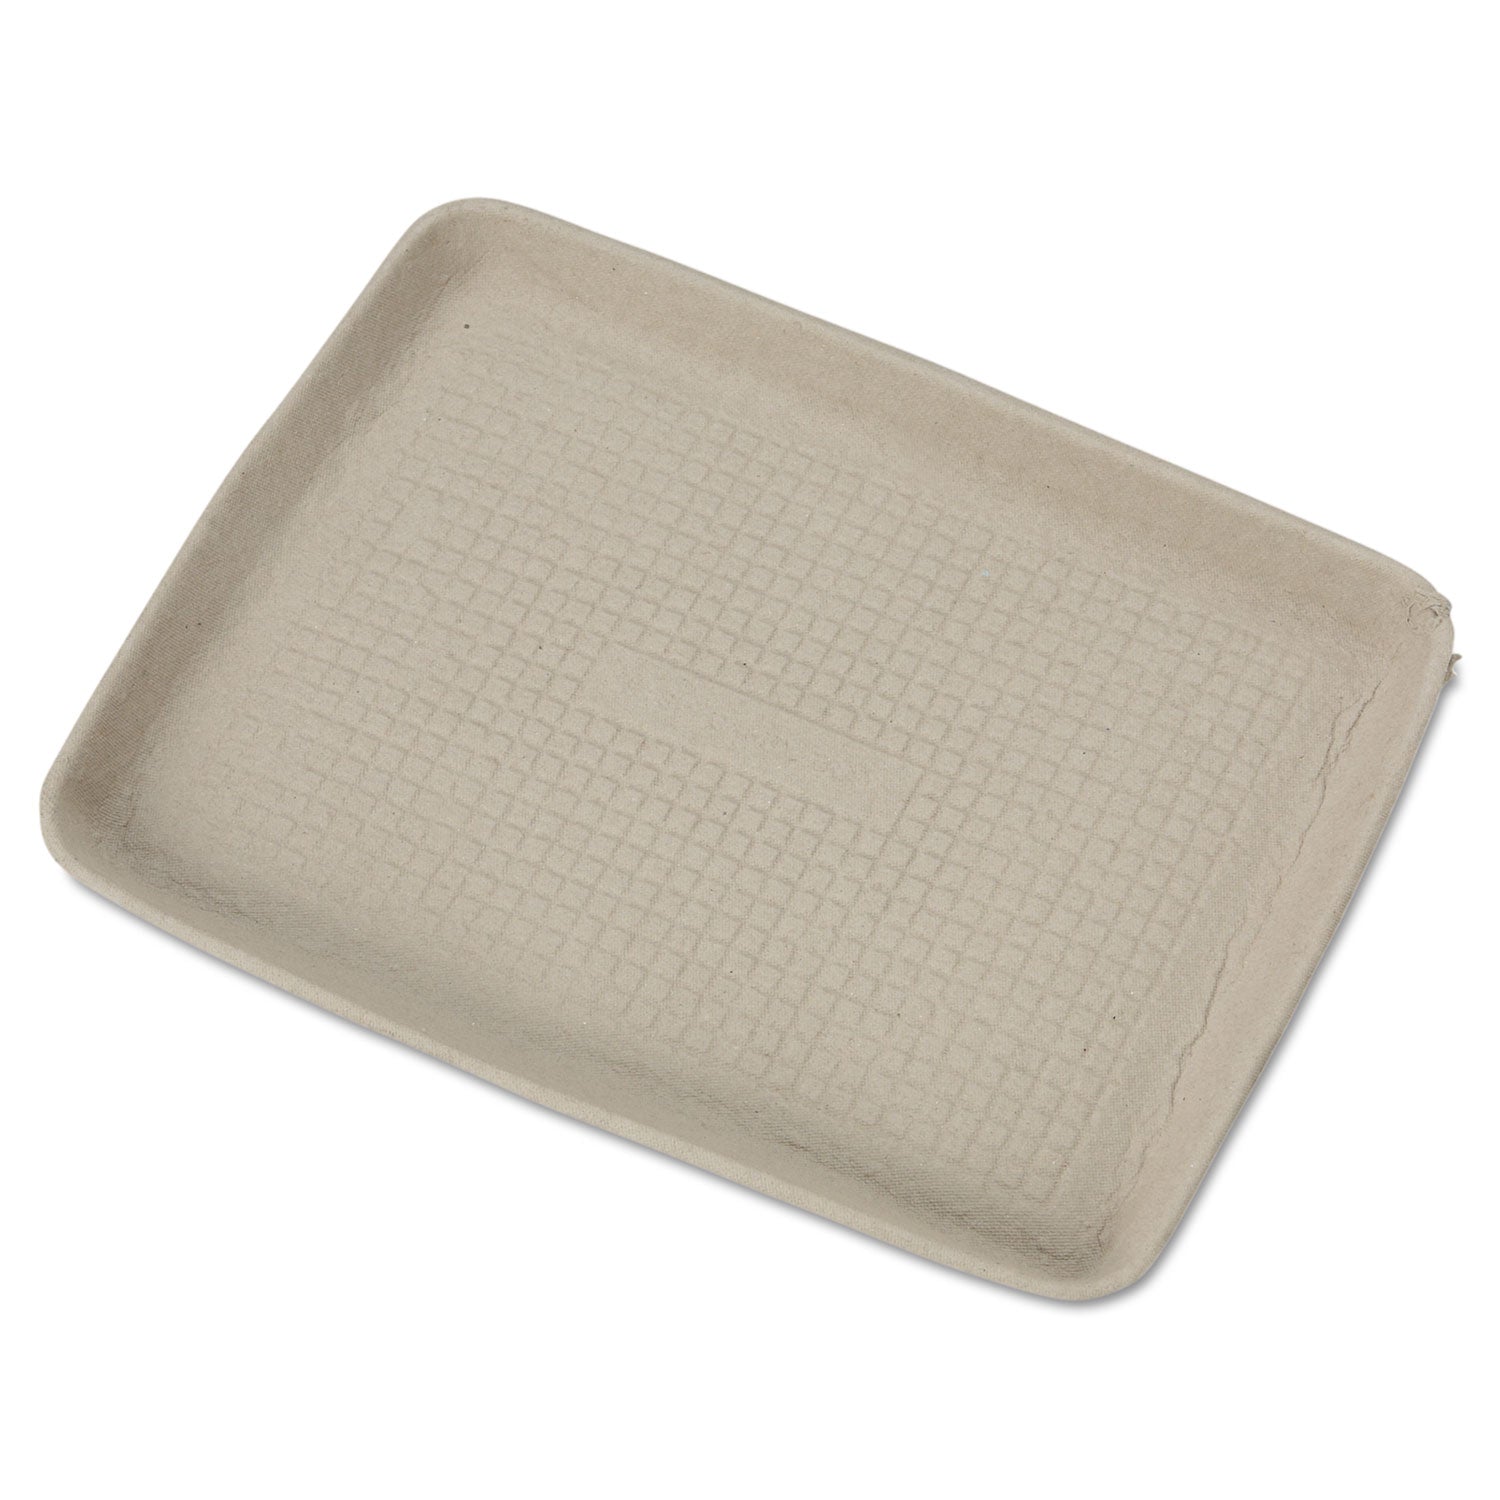 StrongHolder Molded Fiber Food Trays, 1-Compartment, 9 x 12 x 1, Beige, Paper, 250/Carton - 